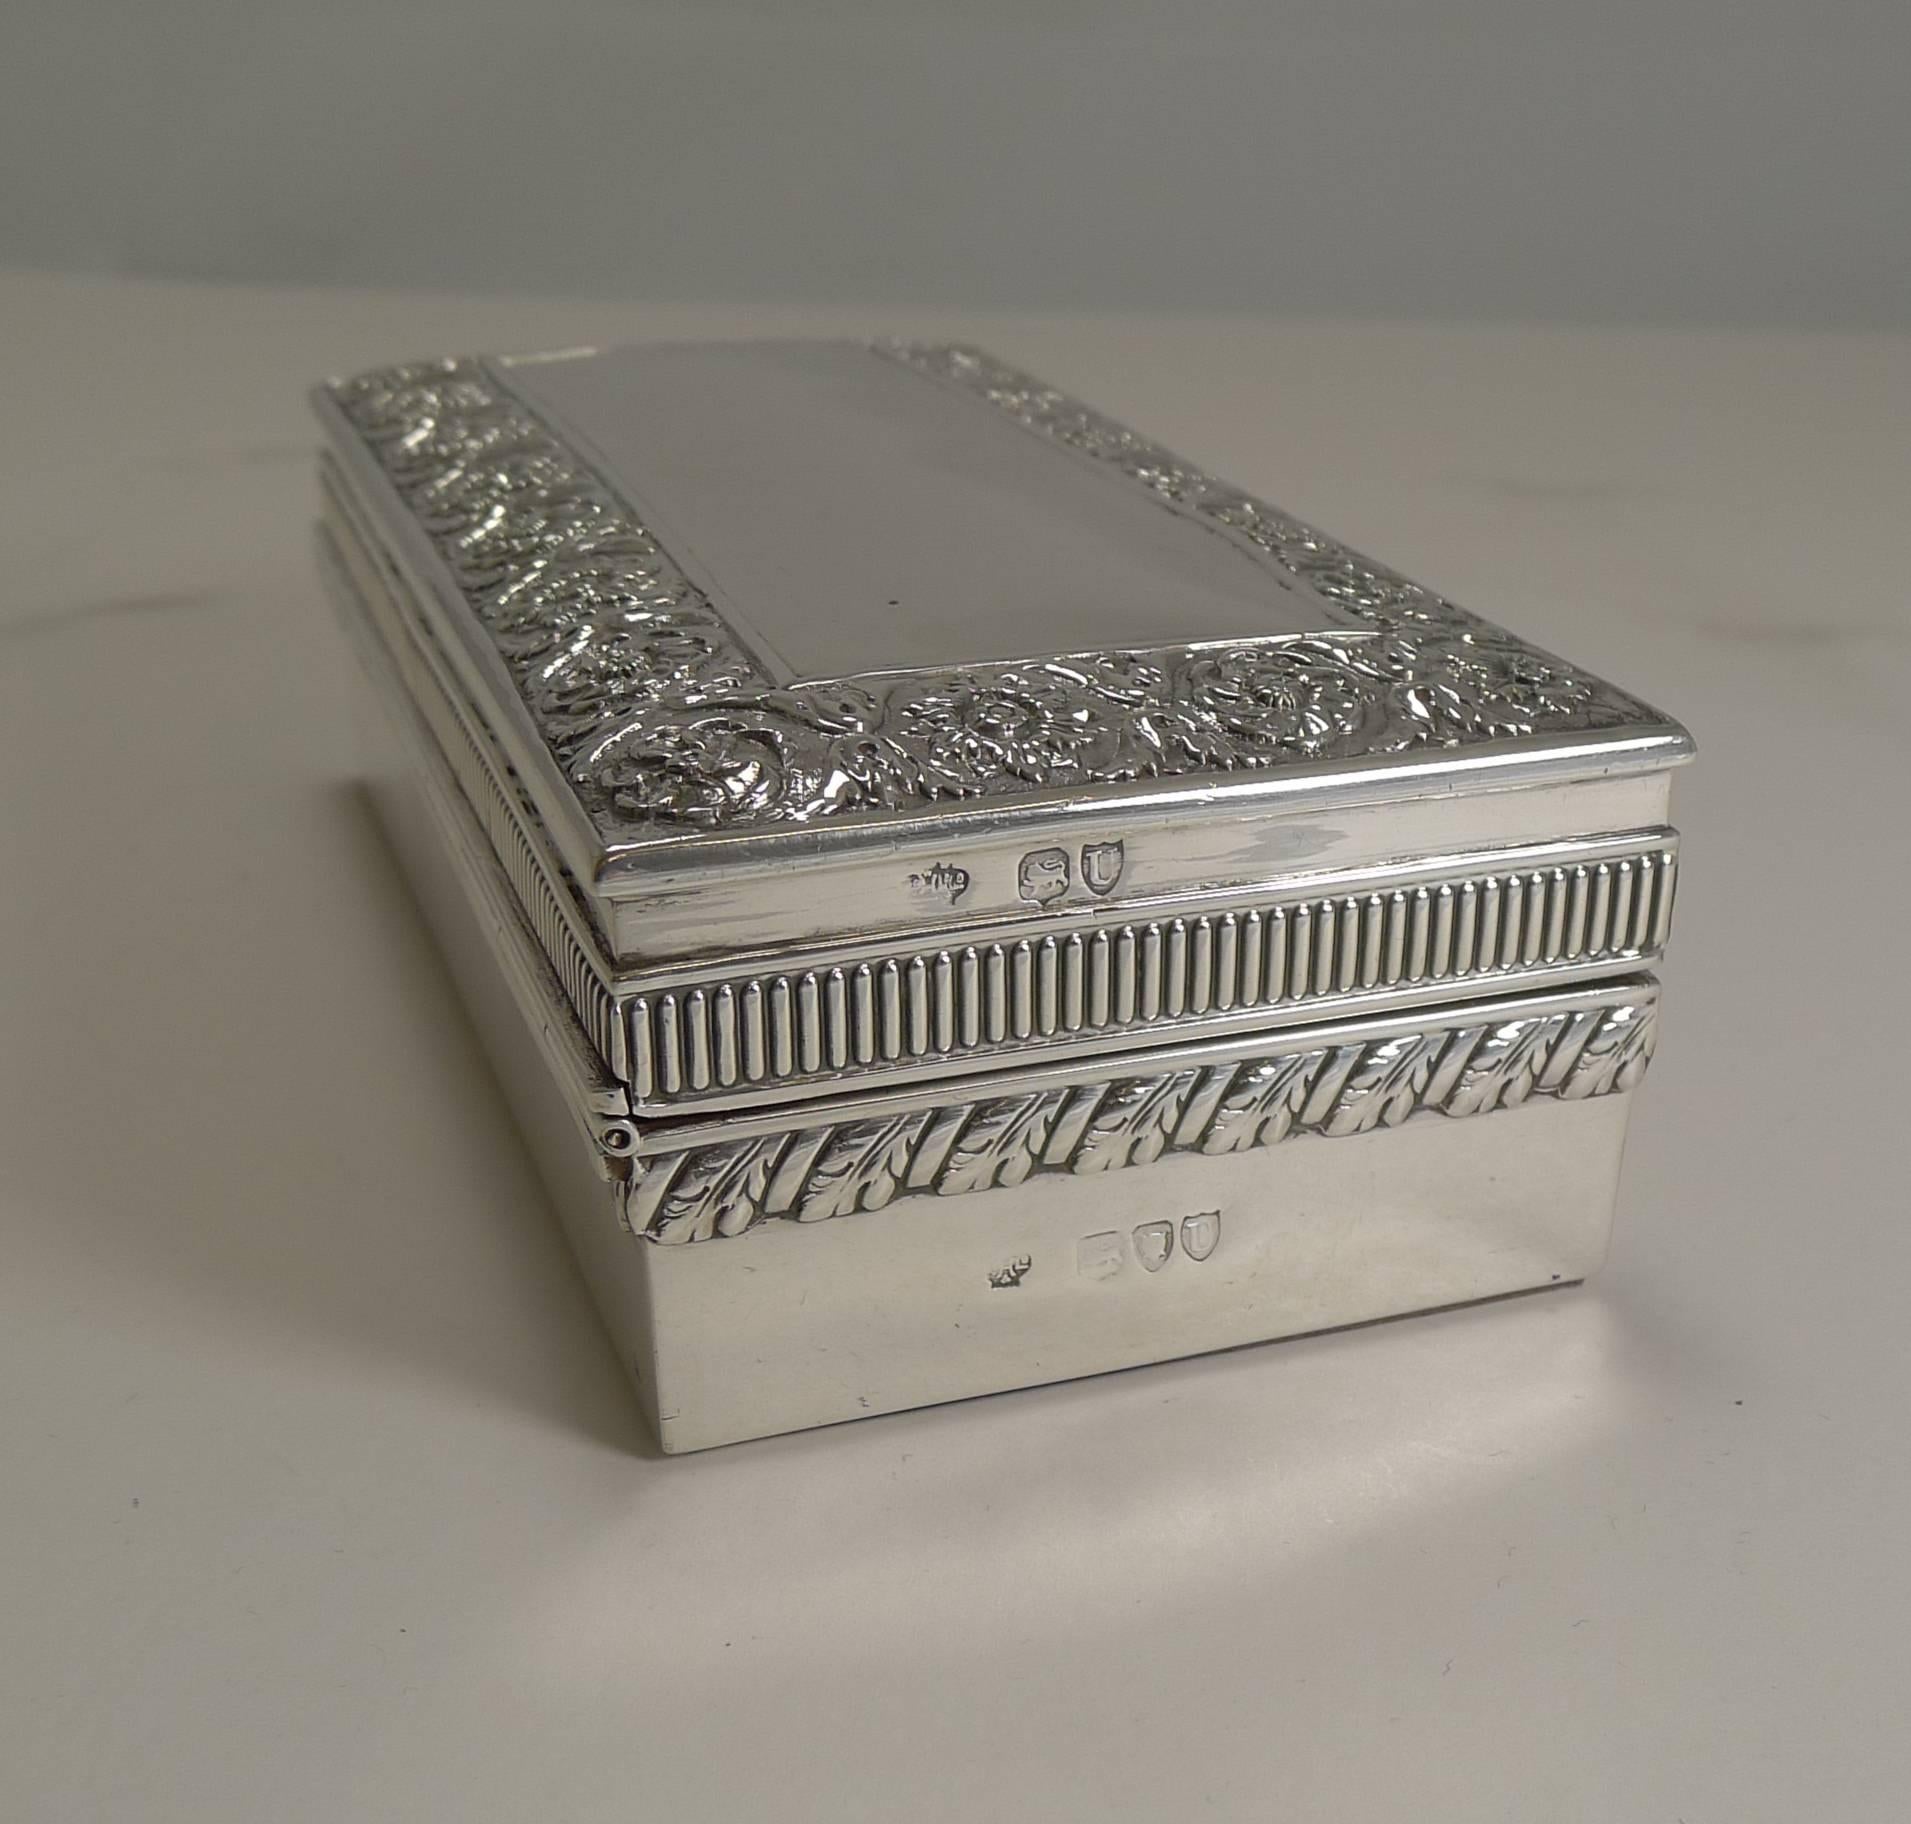 Late Victorian Antique English Sterling Silver Jewelry Box by William Hutton, 1895